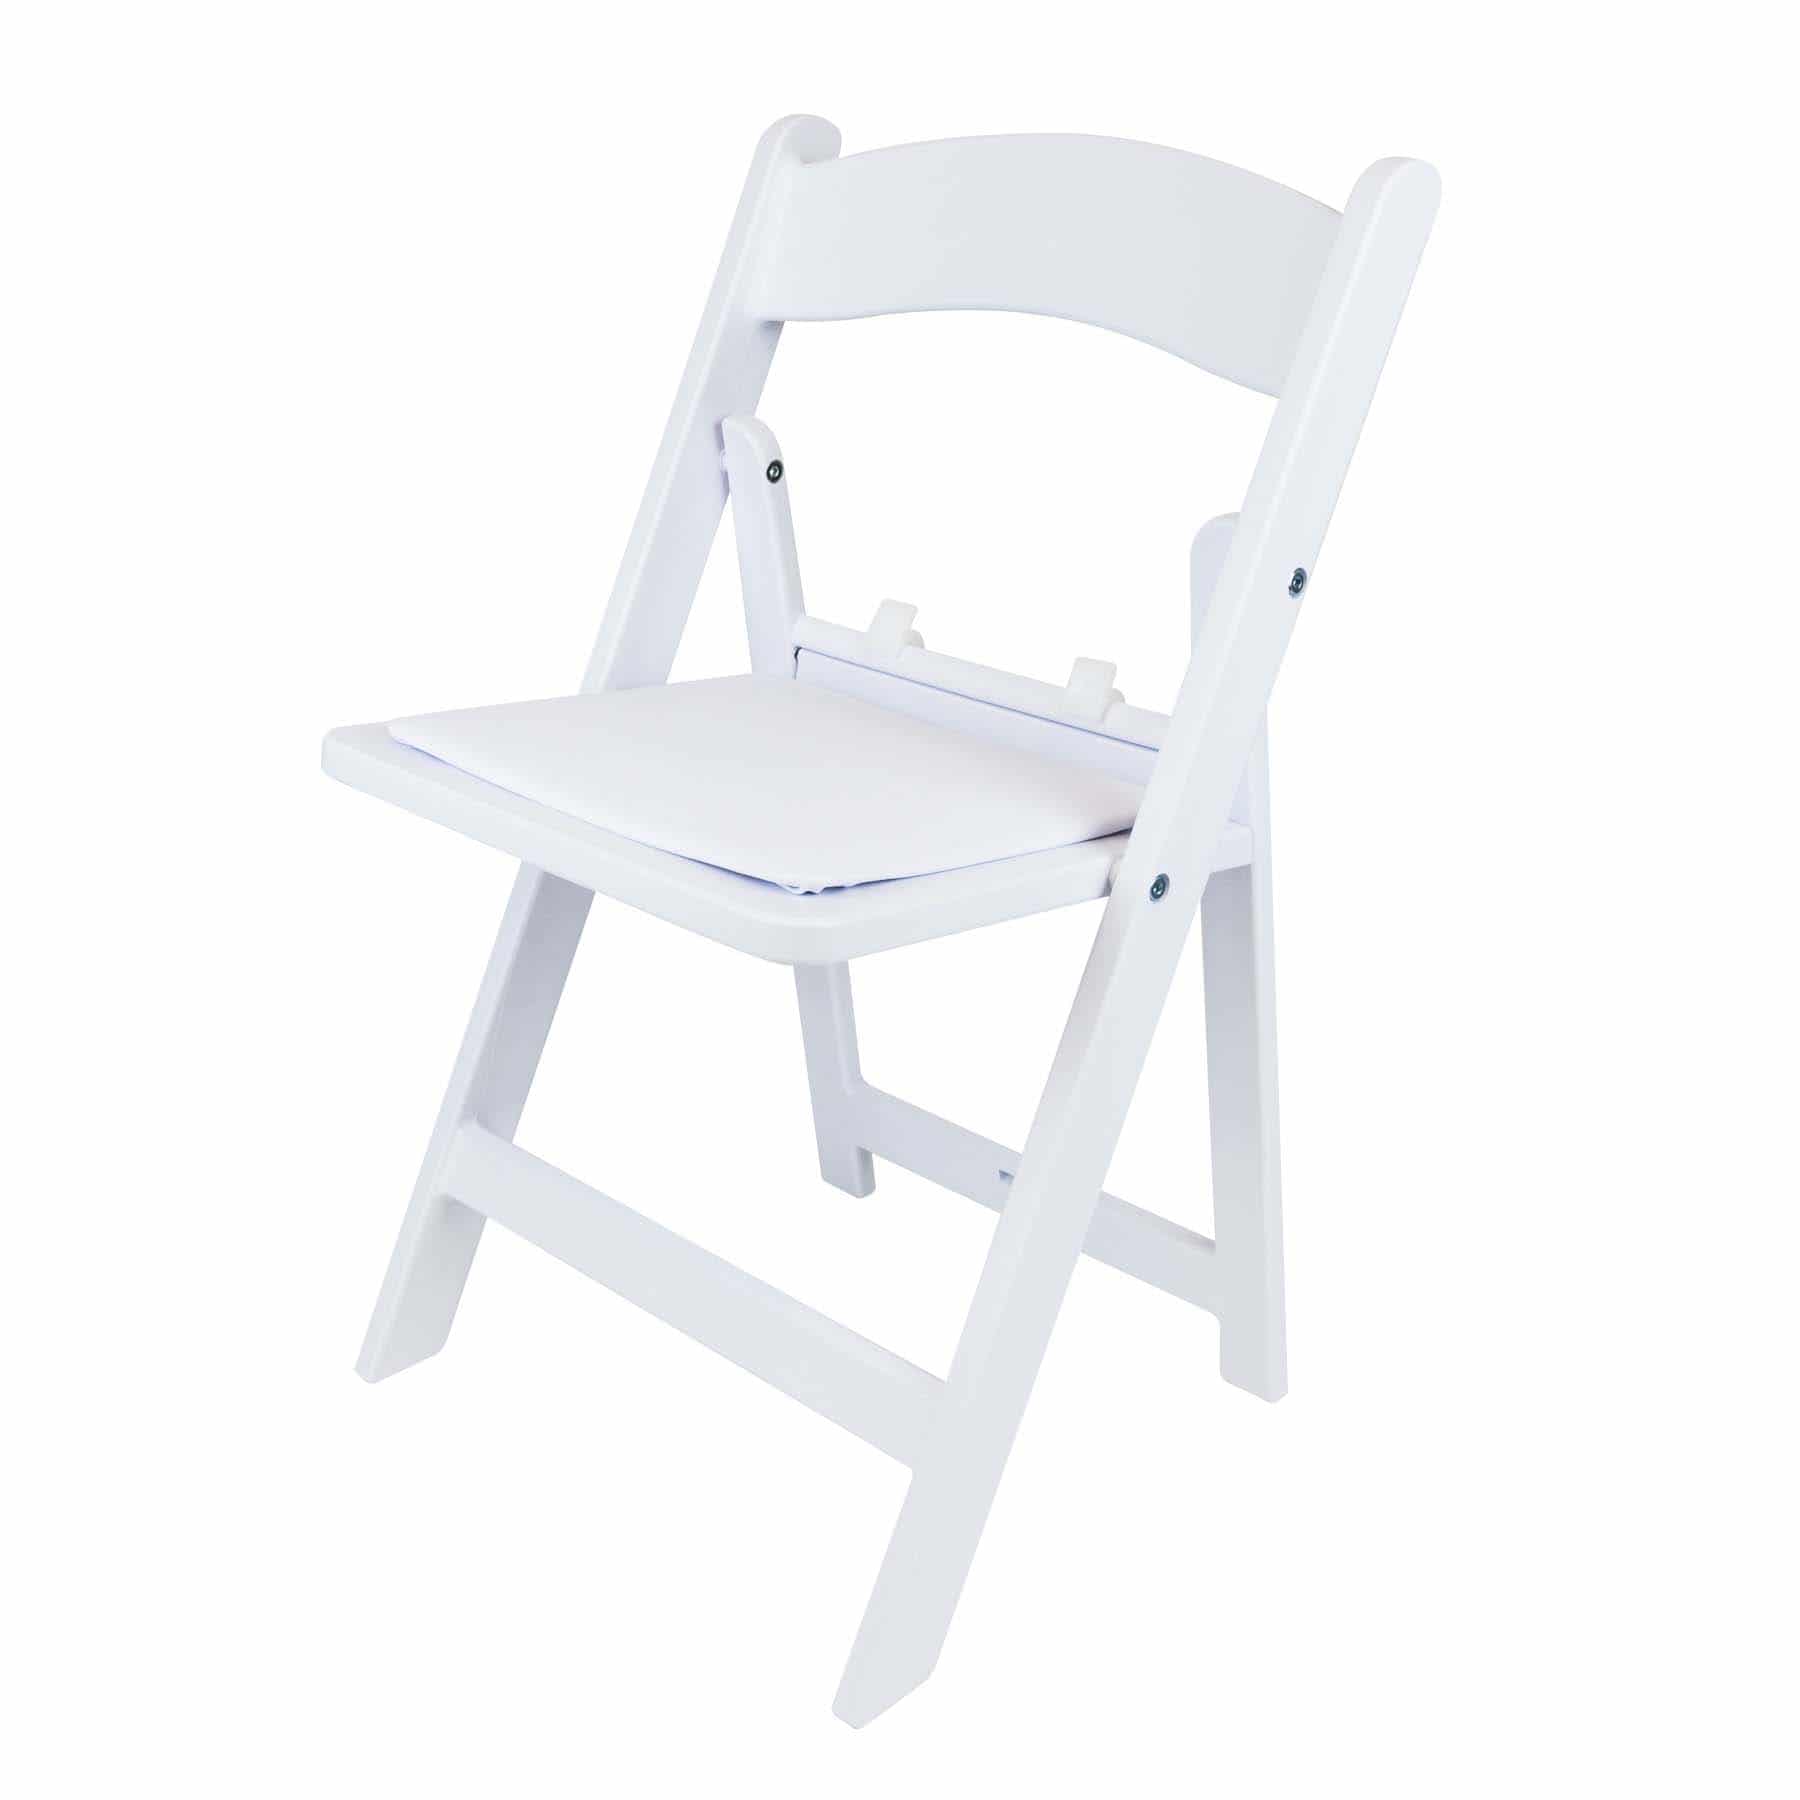 Child Size Americana Chair The Popular Americana Chair Only Mini